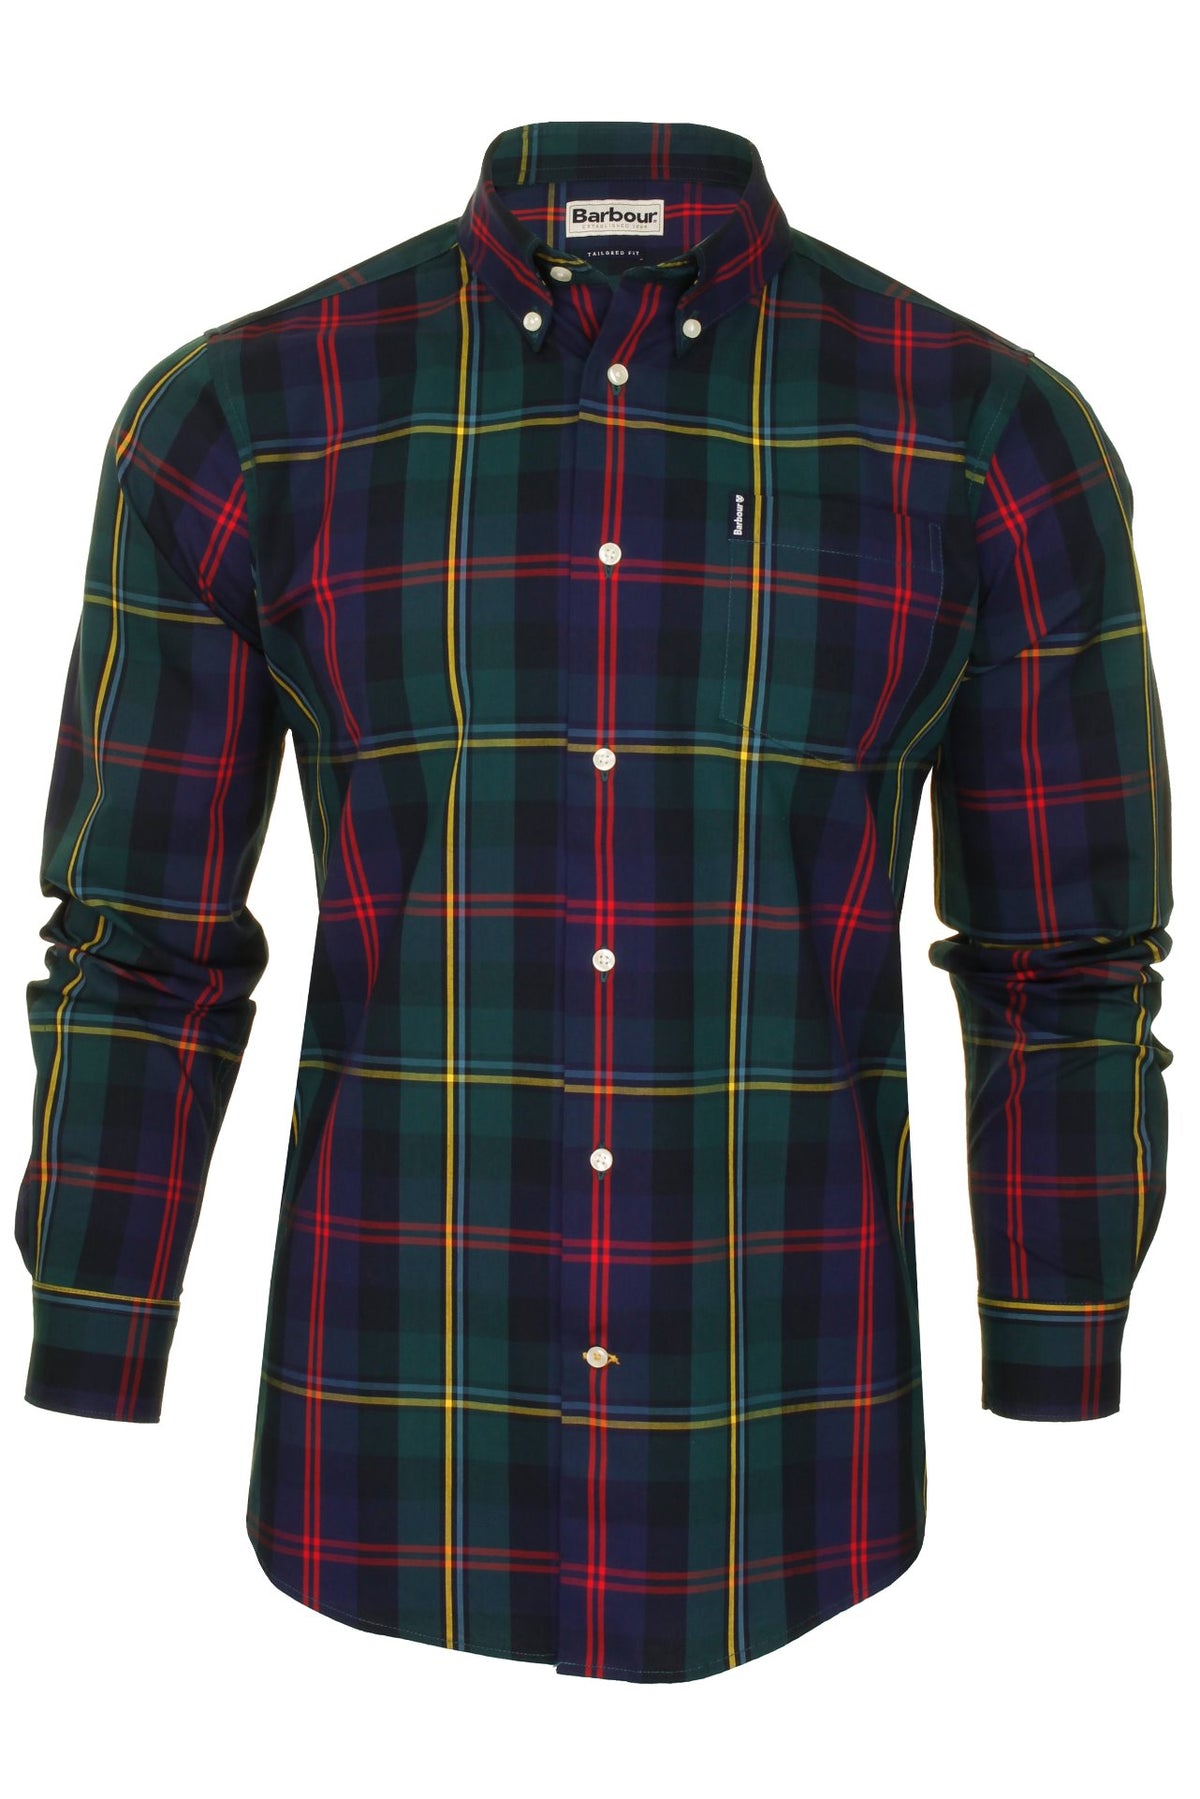 Barbour 'Highland Check 9' Shirt - Long Sleeved, 01, Msh4550, Green